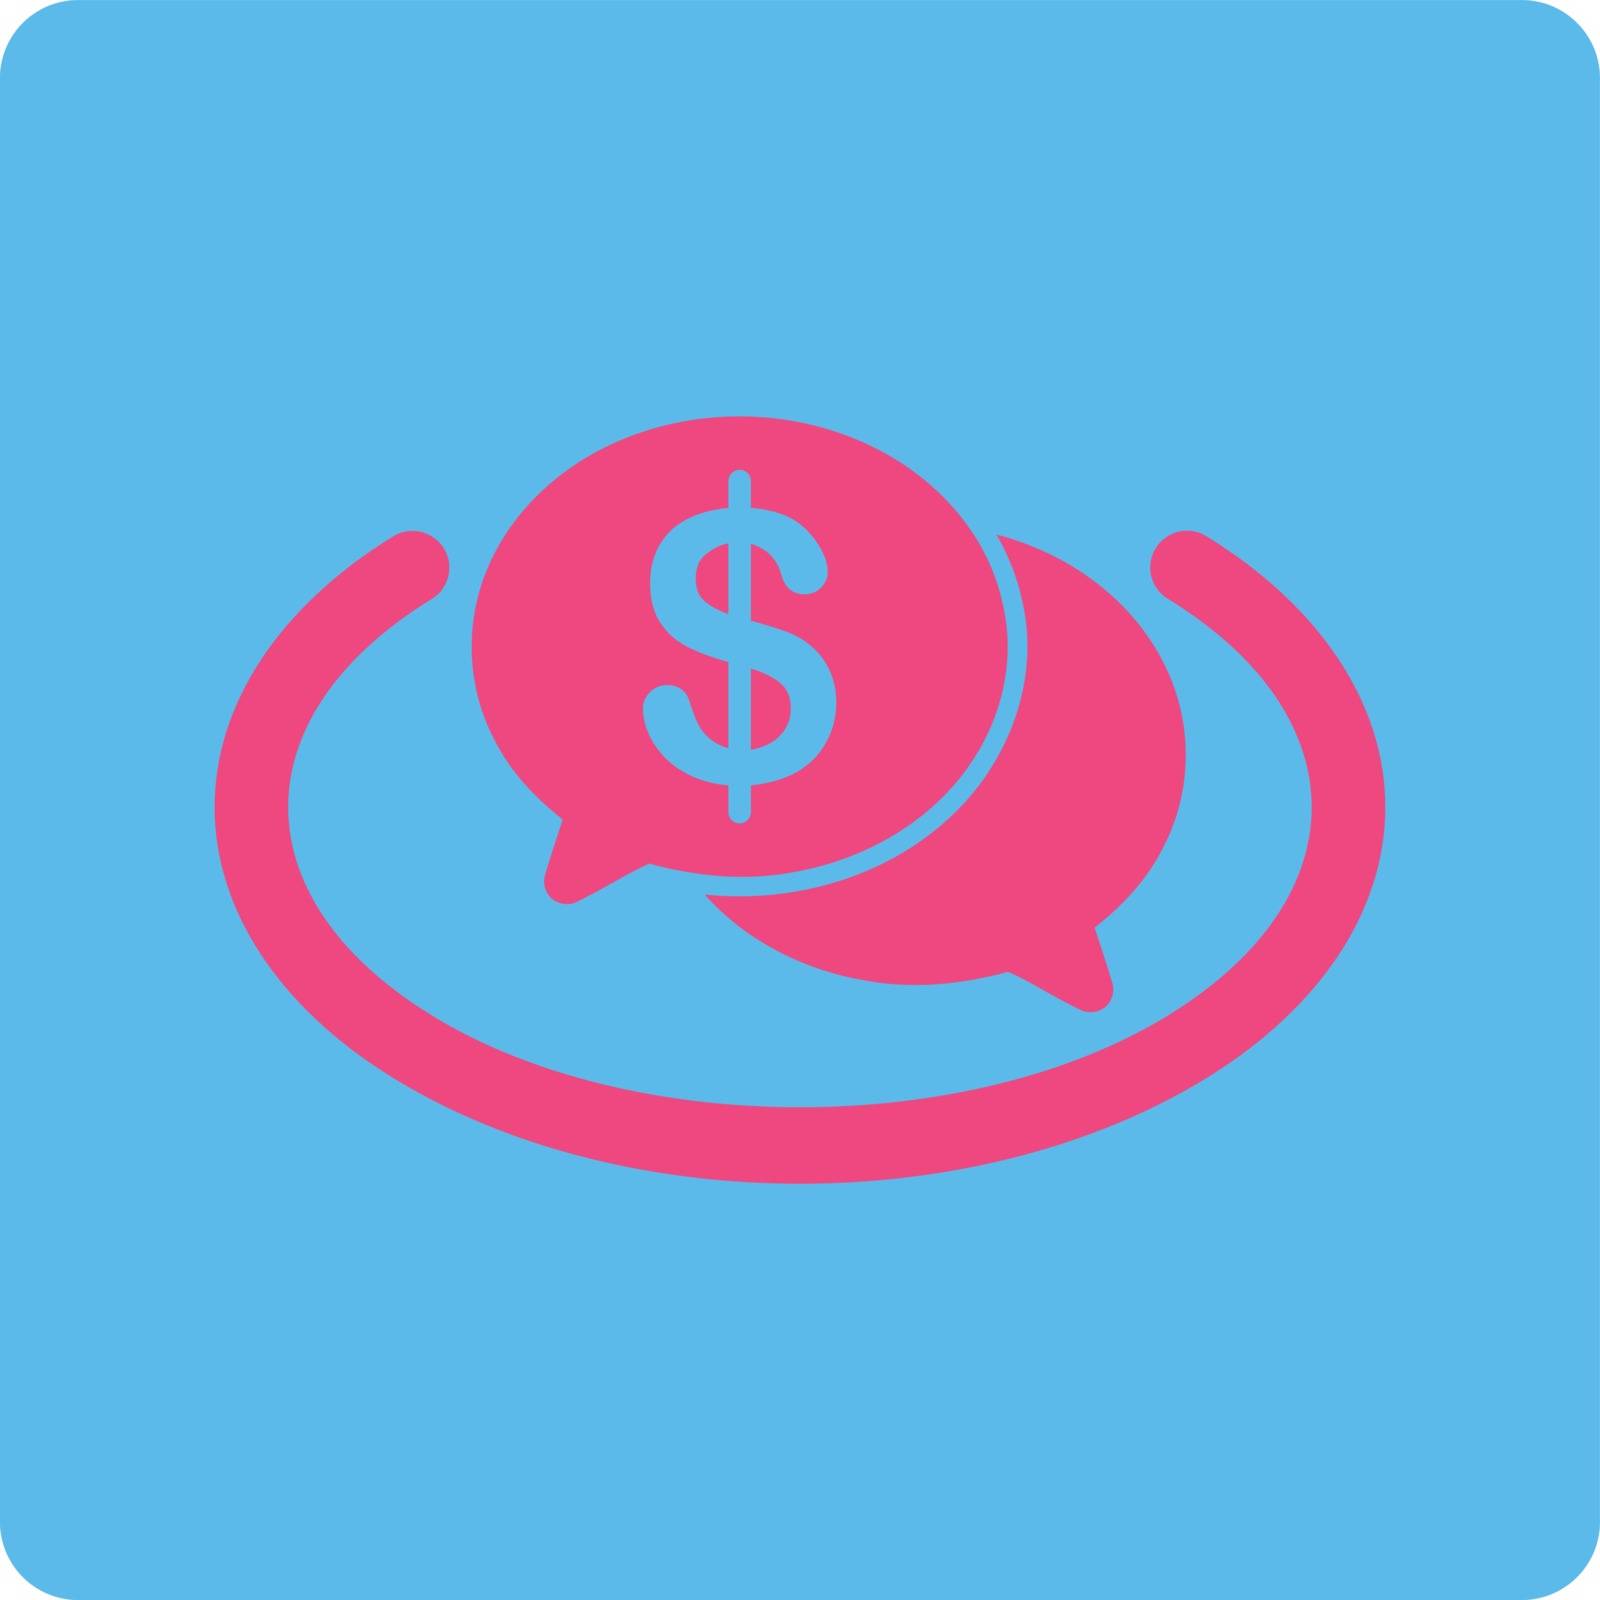 Financial Network icon. This flat rounded square button uses pink and blue colors and isolated on a white background.